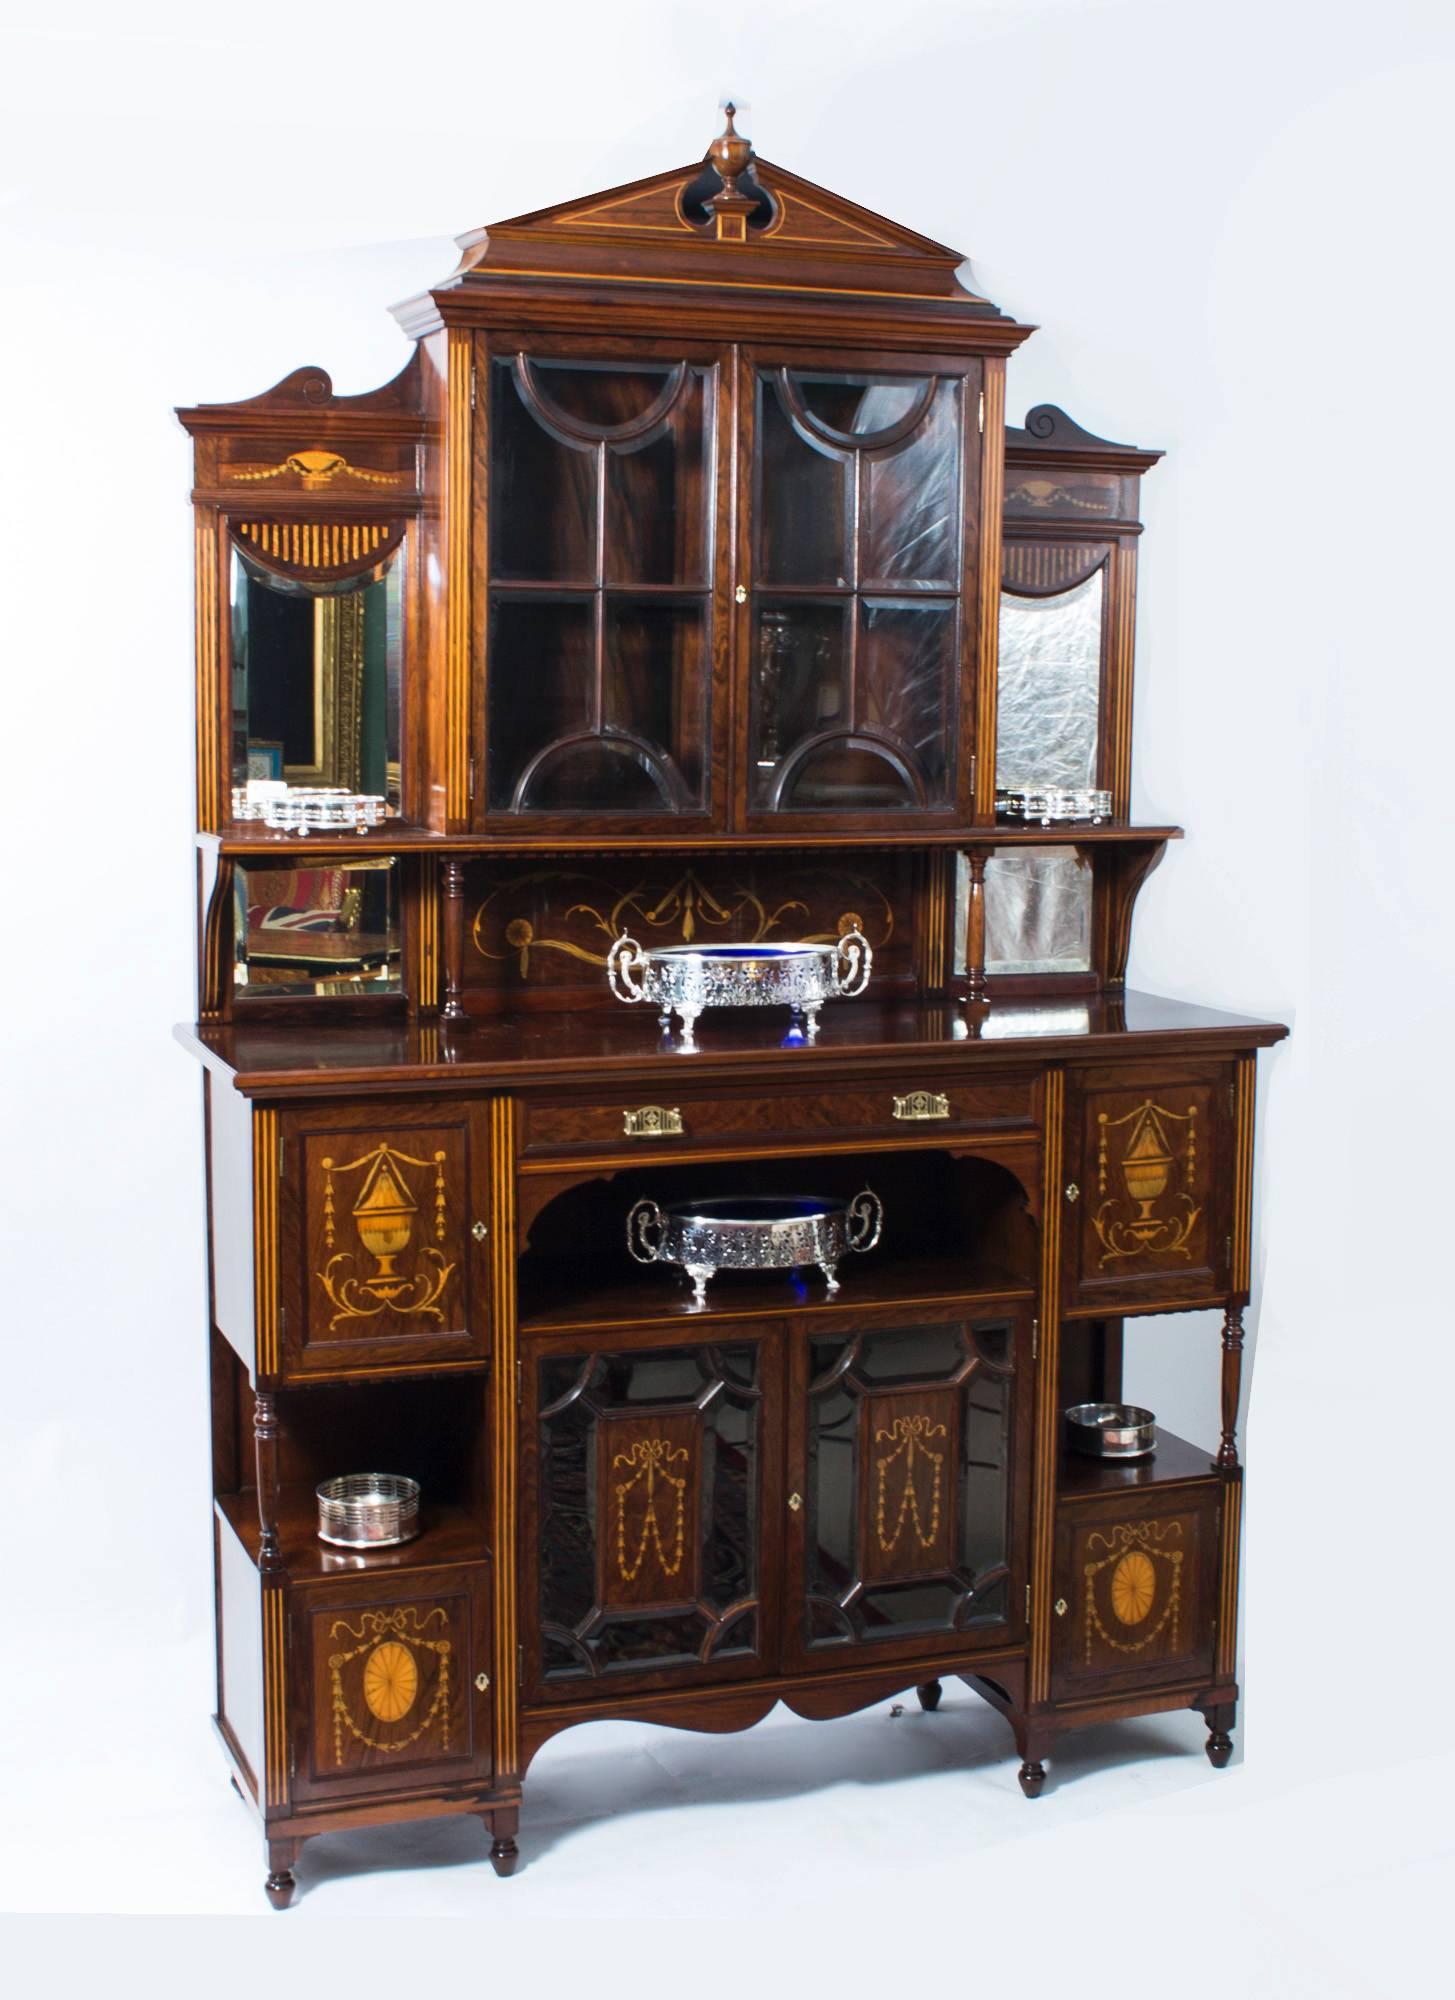 This is a stunning antique English Edwardian inlaid rosewood cabinet with mirror panels, circa 1890 in date. 

This cabinet is of the very highest quality, with exquisite hand cut inlaid satinwood marquetry decoration. 

The top has an elegant